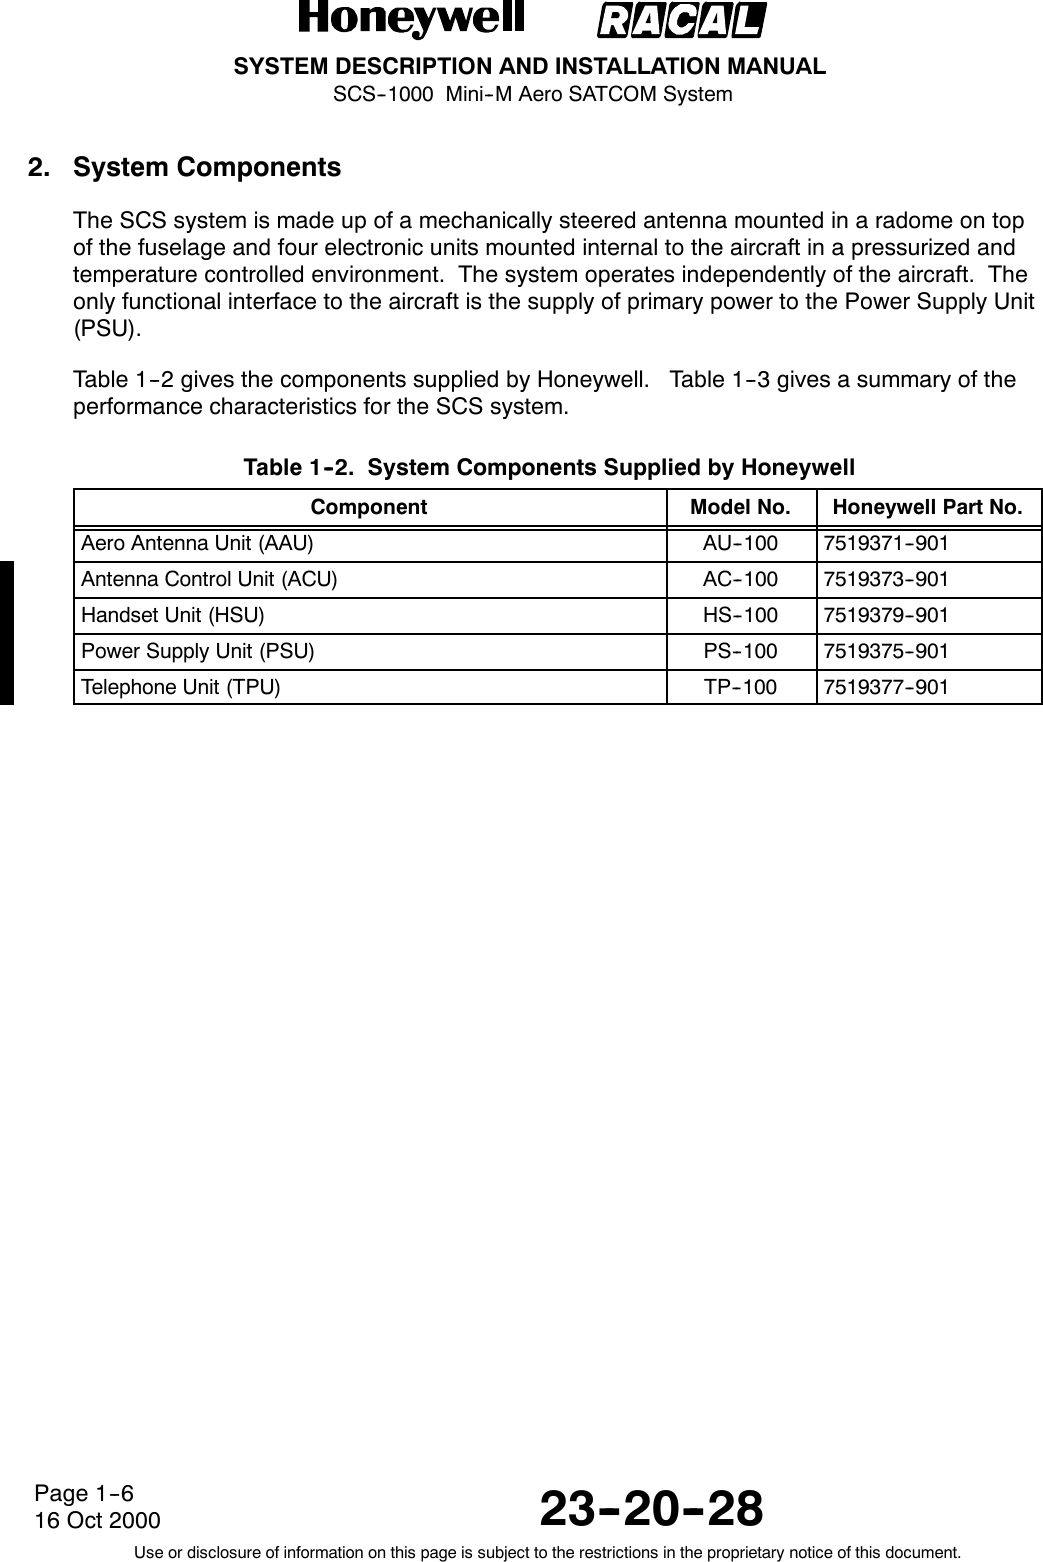 SYSTEM DESCRIPTION AND INSTALLATION MANUALSCS--1000 Mini--M Aero SATCOM System23--20--28Use or disclosure of information on this page is subject to the restrictions in the proprietary notice of this document.Page 1--616 Oct 20002. System ComponentsThe SCS system is made up of a mechanically steered antenna mounted in a radome on topof the fuselage and four electronic units mounted internal to the aircraft in a pressurized andtemperature controlled environment. The system operates independently of the aircraft. Theonly functional interface to the aircraft is the supply of primary power to the Power Supply Unit(PSU).Table 1--2 gives the components supplied by Honeywell. Table 1--3 gives a summary of theperformance characteristics for the SCS system.Table 1--2. System Components Supplied by HoneywellComponent Model No. Honeywell Part No.Aero Antenna Unit (AAU) AU--100 7519371--901Antenna Control Unit (ACU) AC--100 7519373--901Handset Unit (HSU) HS--100 7519379--901Power Supply Unit (PSU) PS--100 7519375--901Telephone Unit (TPU) TP--100 7519377--901